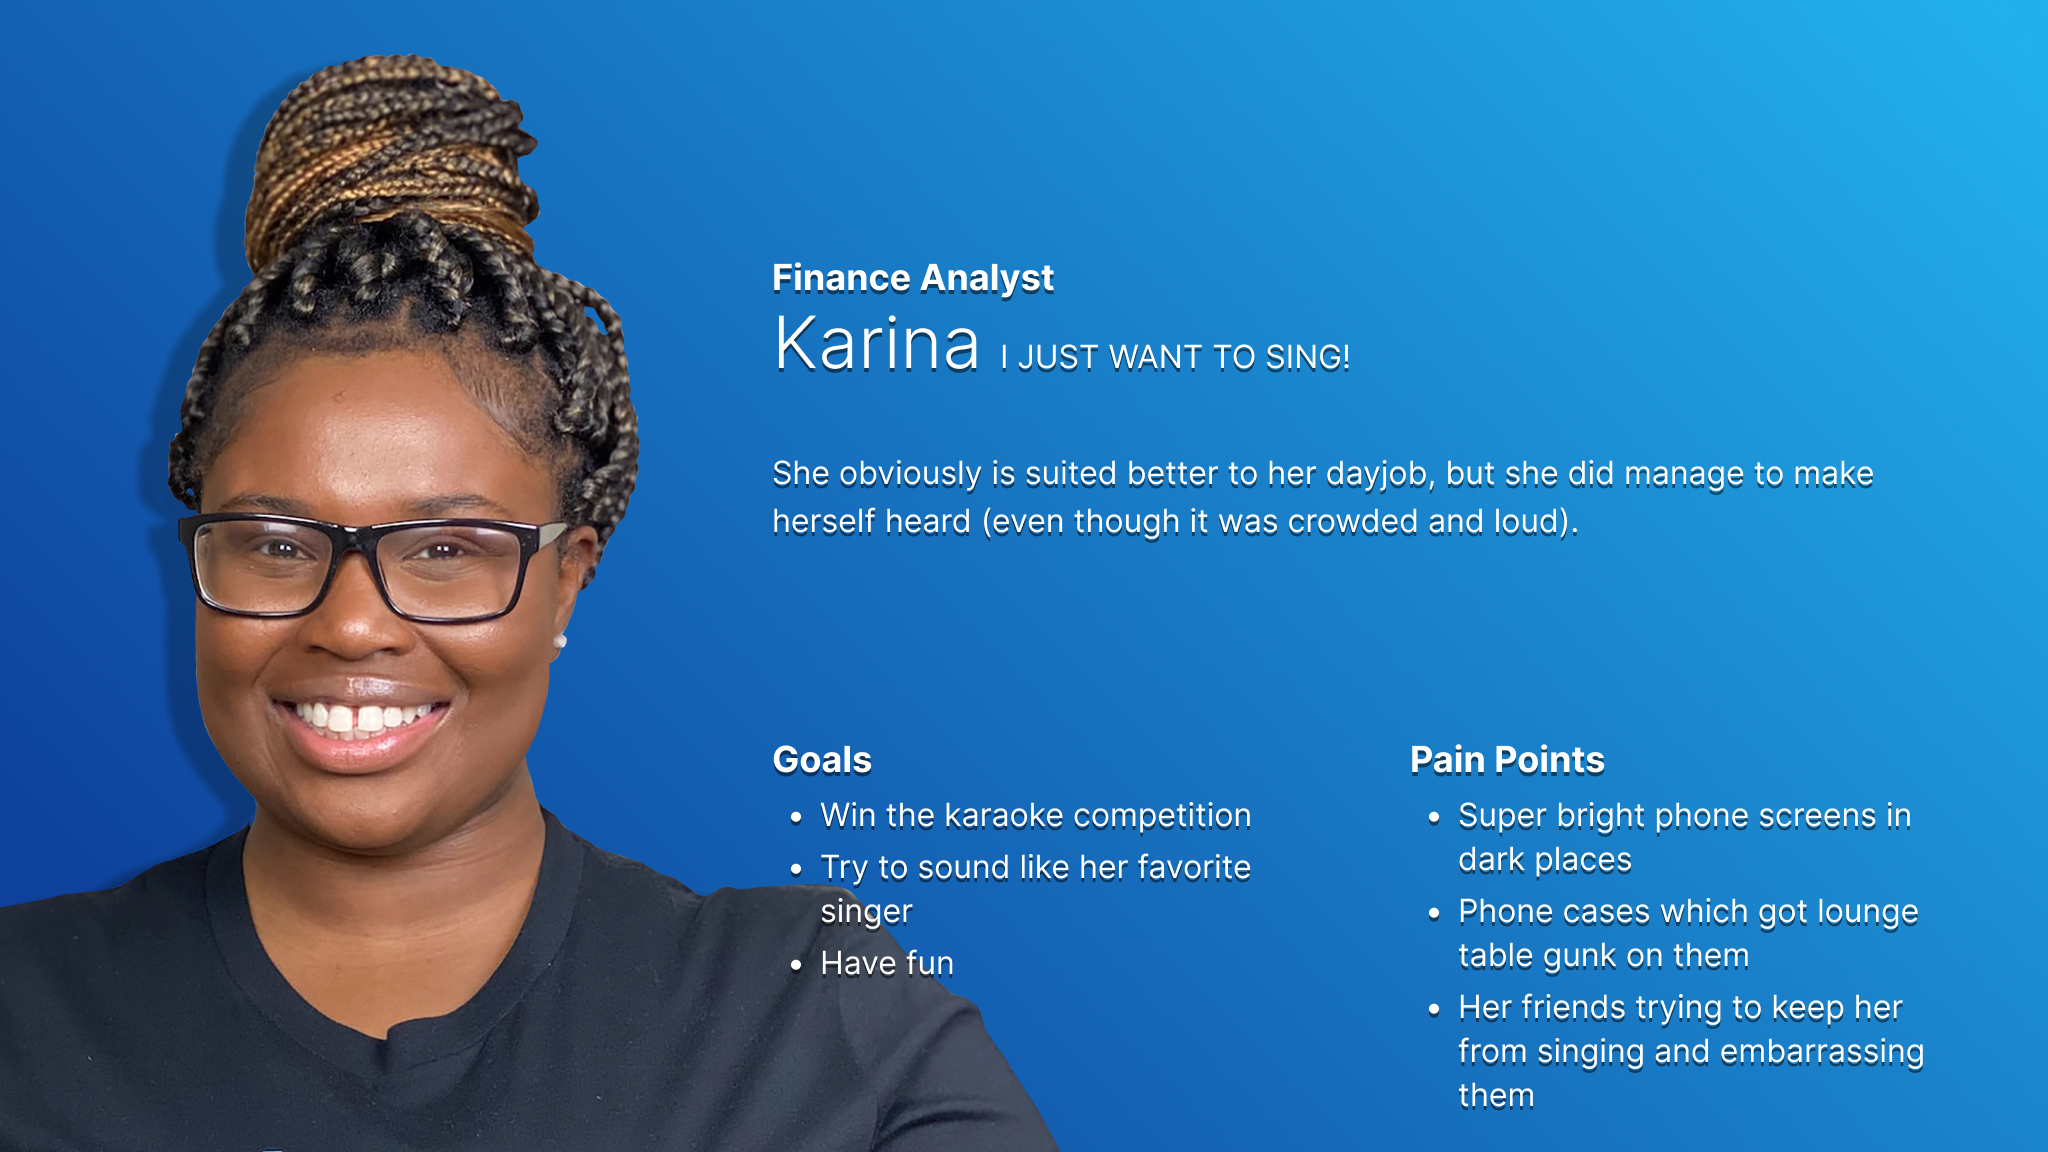 Persona card for Karina, representing younger karaoke competitors who use the karaoke competition app.